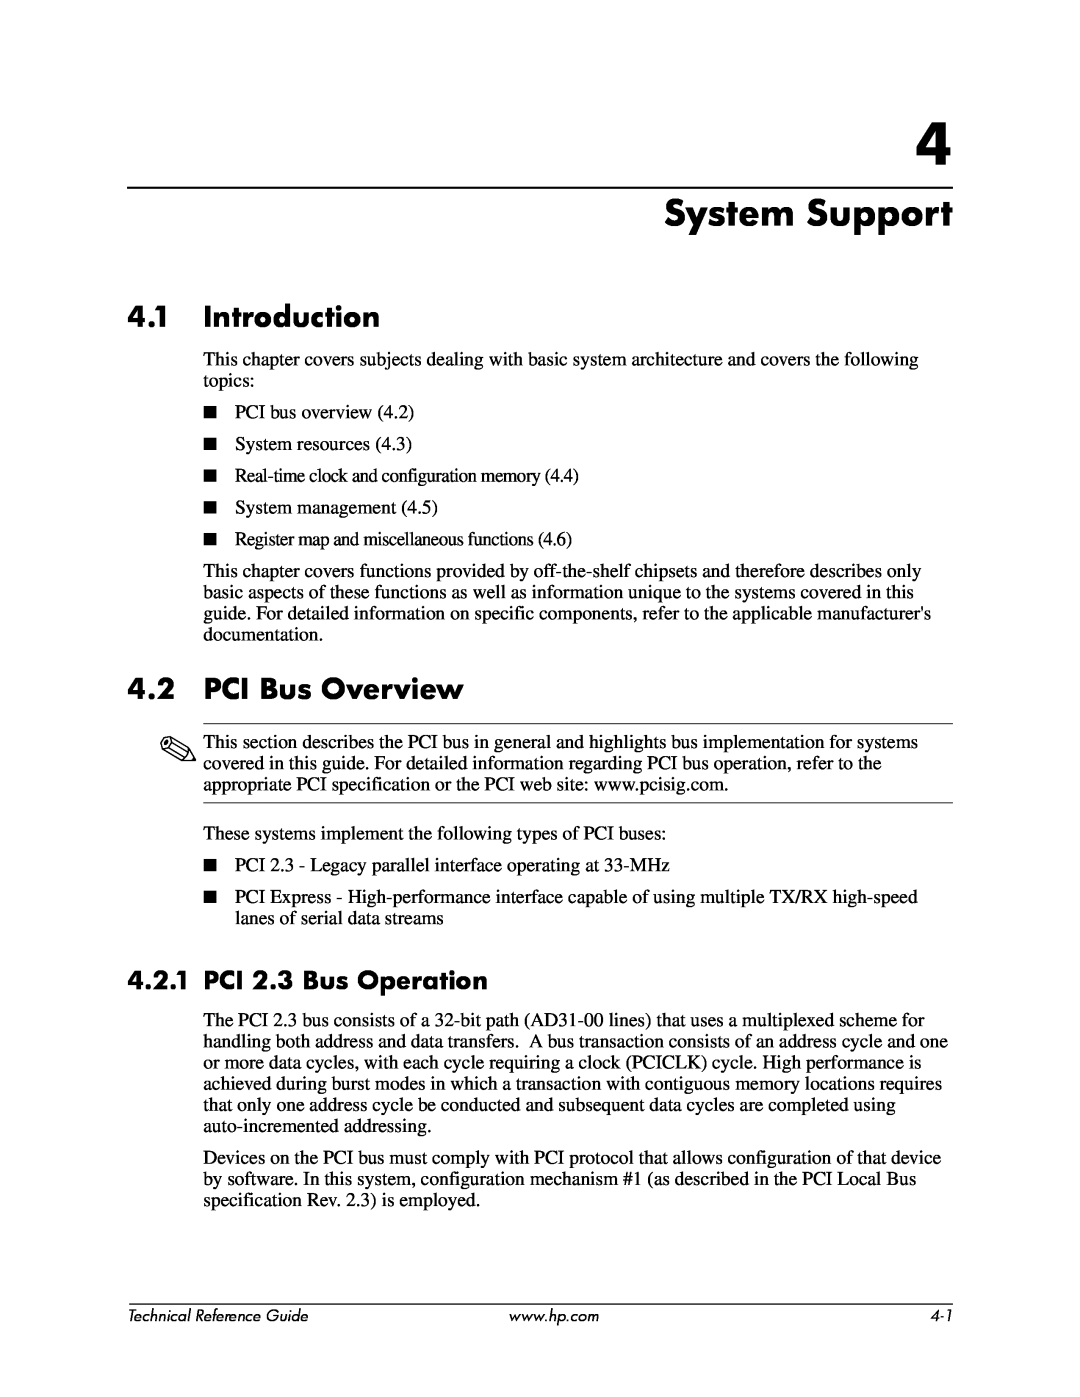 HP 8000 tower manual System Support, Introduction, PCI Bus Overview, PCI 2.3 Bus Operation 